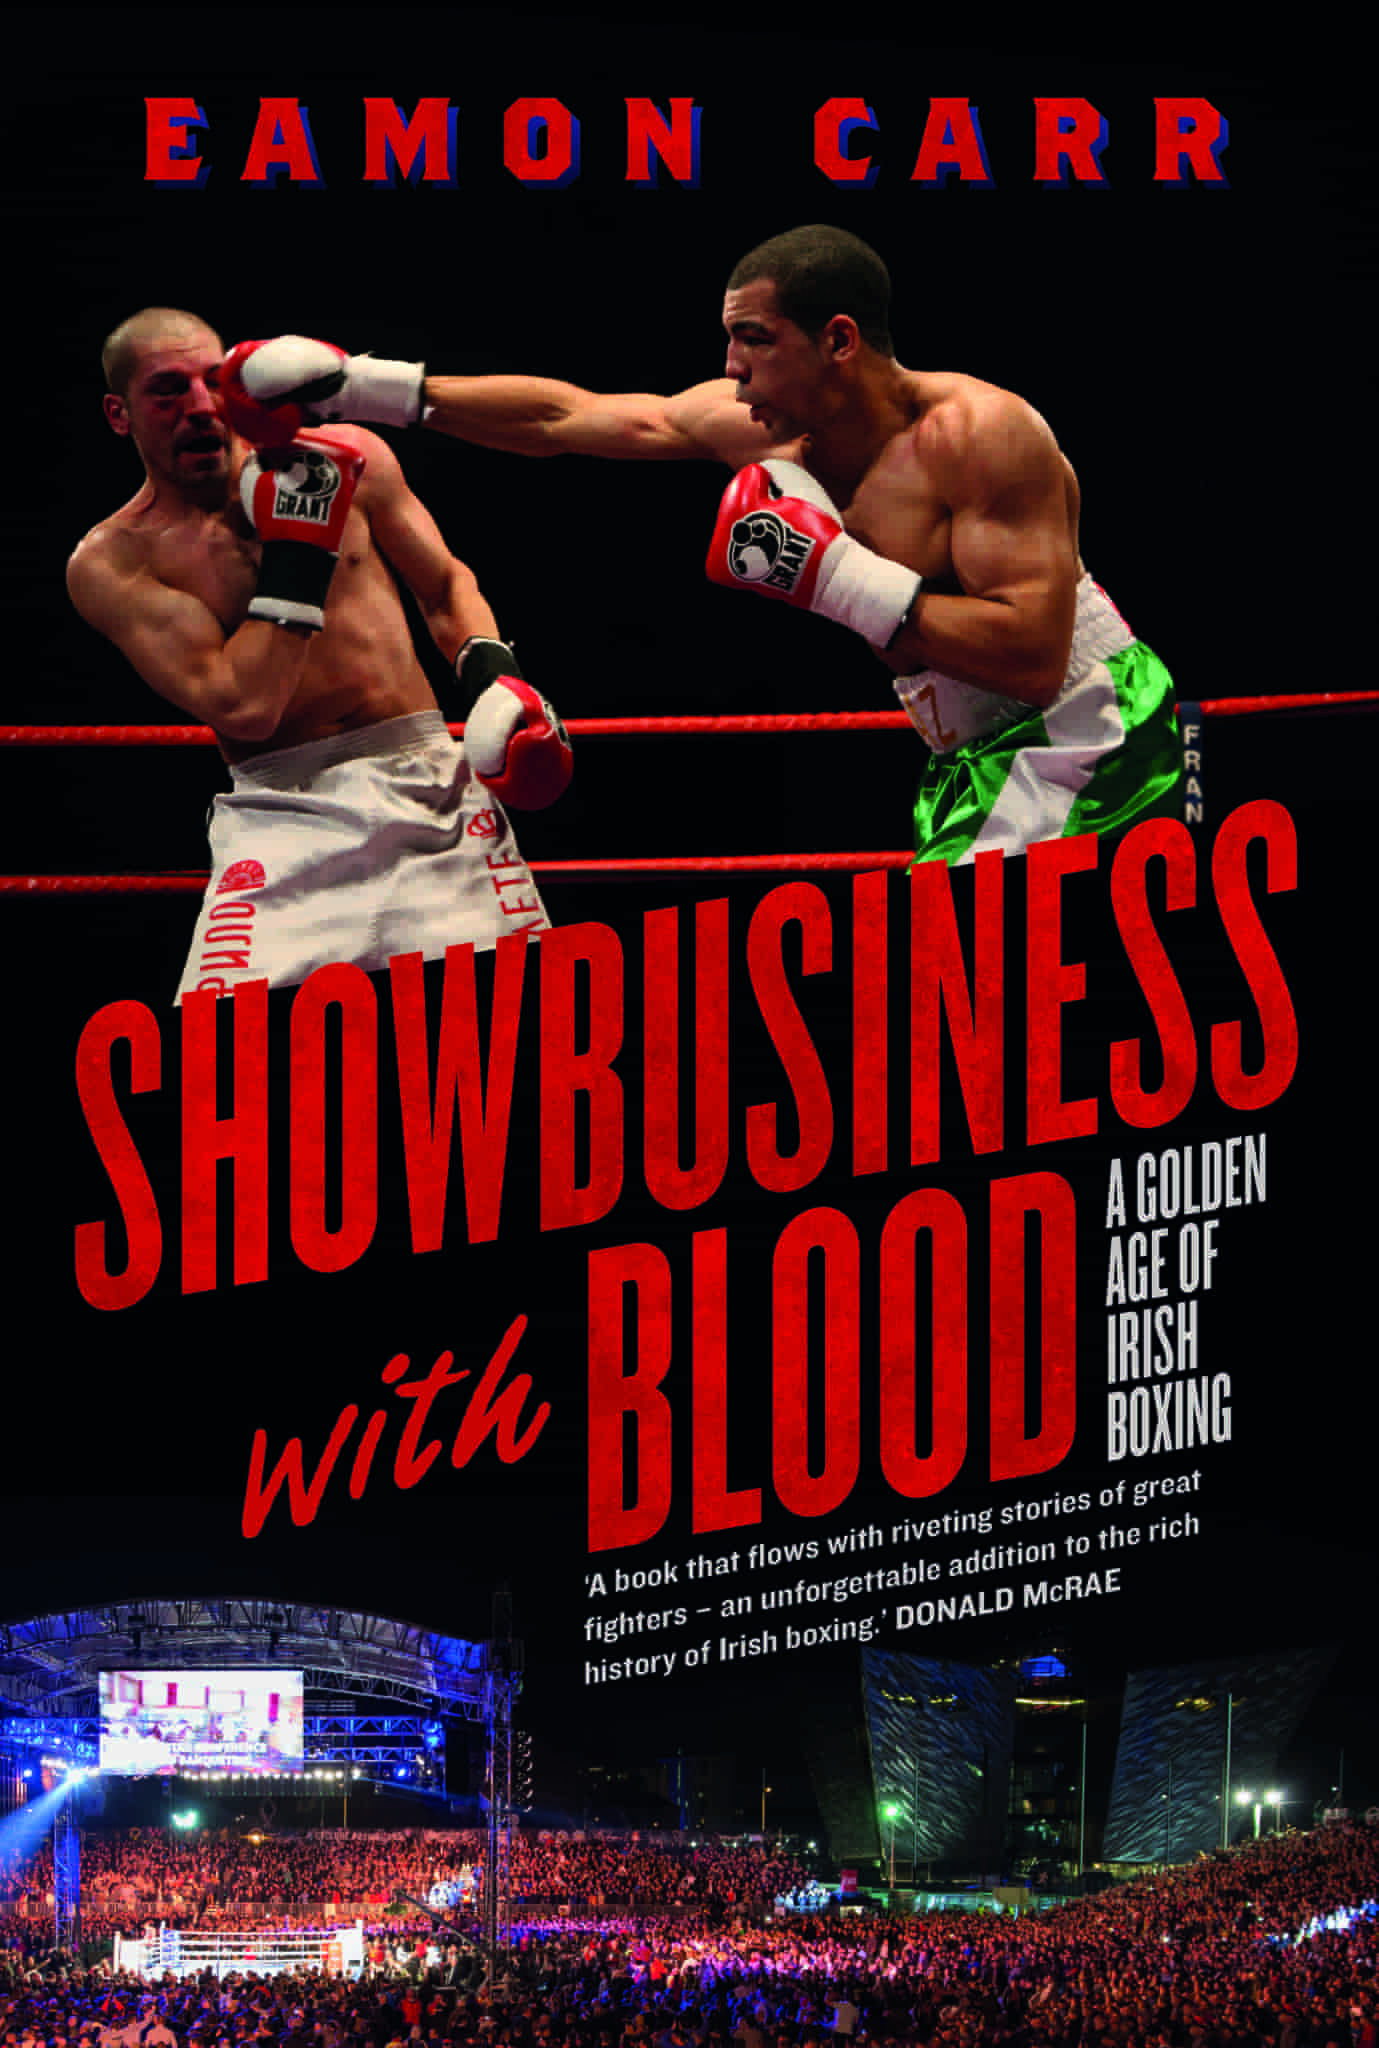 Showbusiness with blood : a Golden Age of Irish boxing summary image